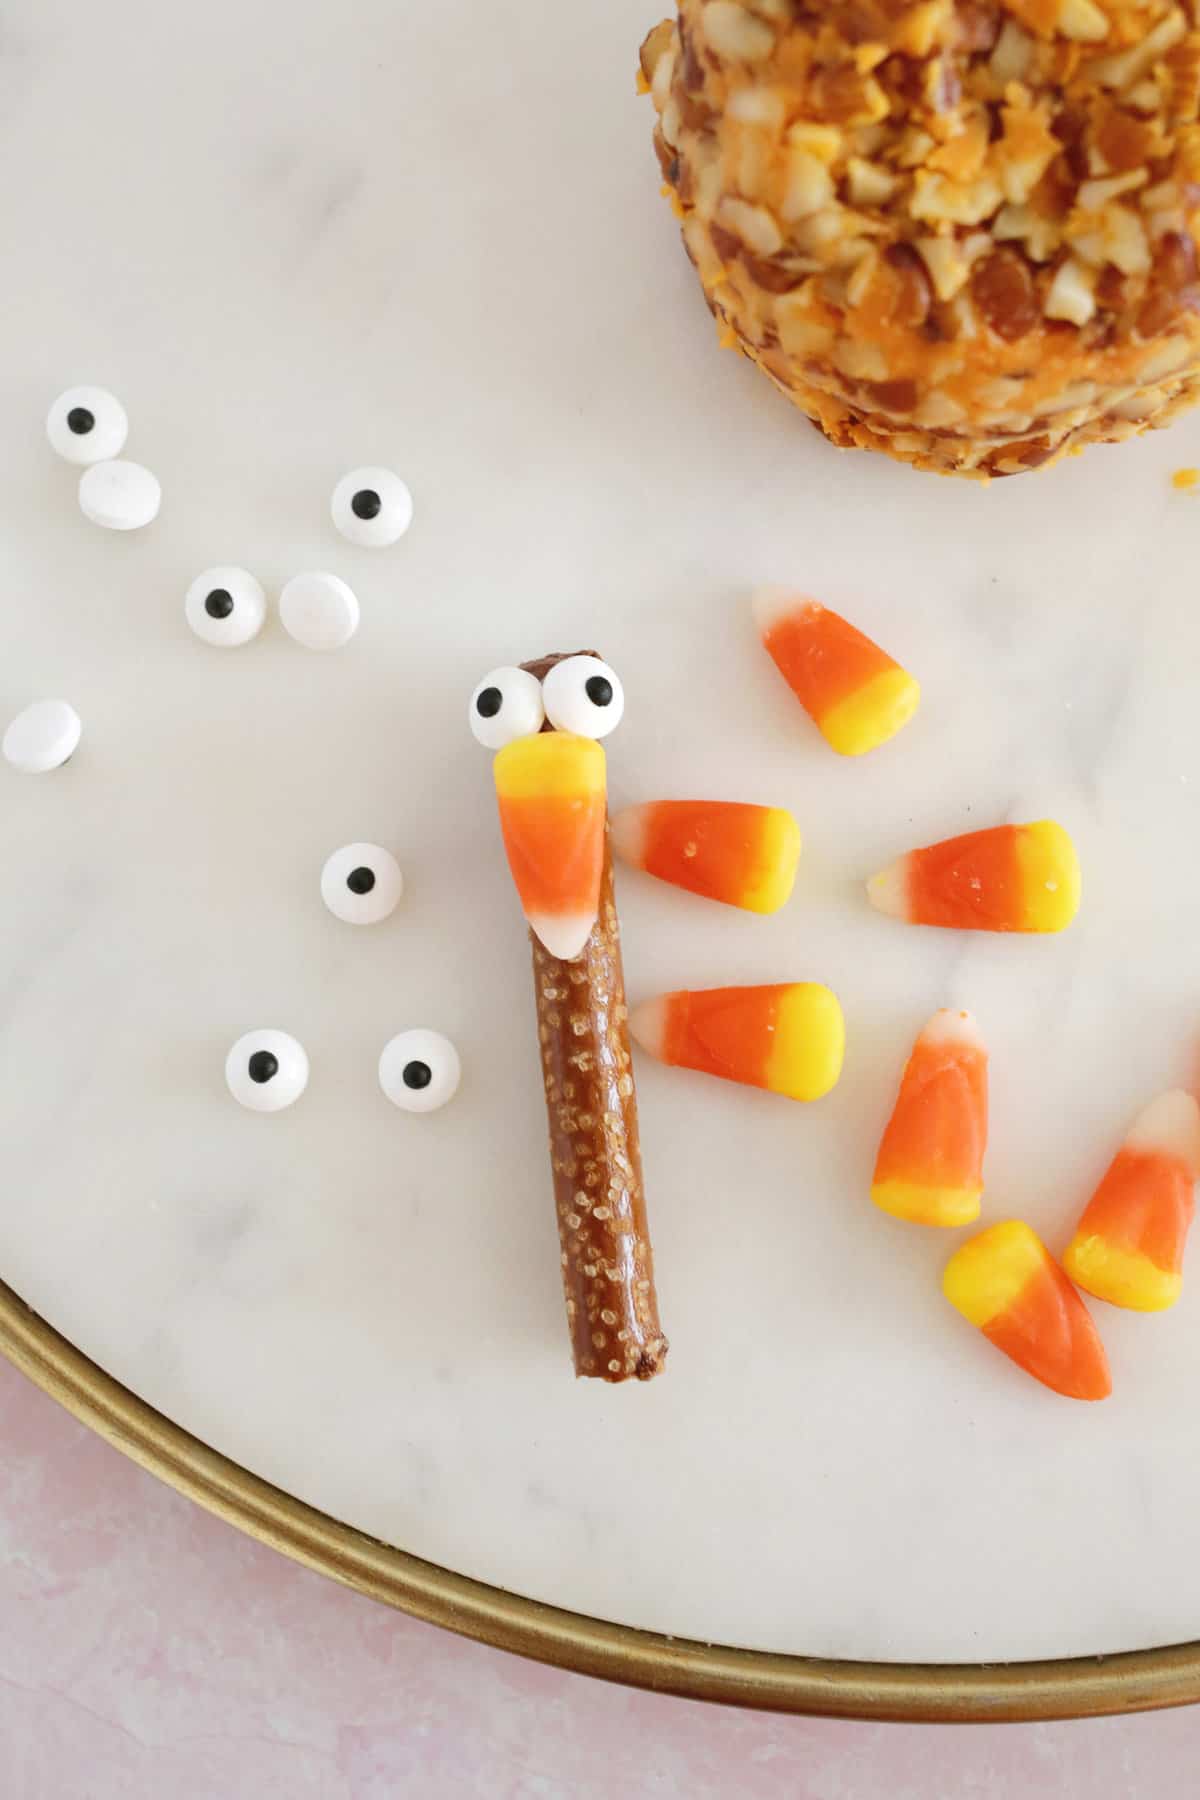 candy eyes, pretzel rod, and candy corn to make a turkey face for turkey cheeseball